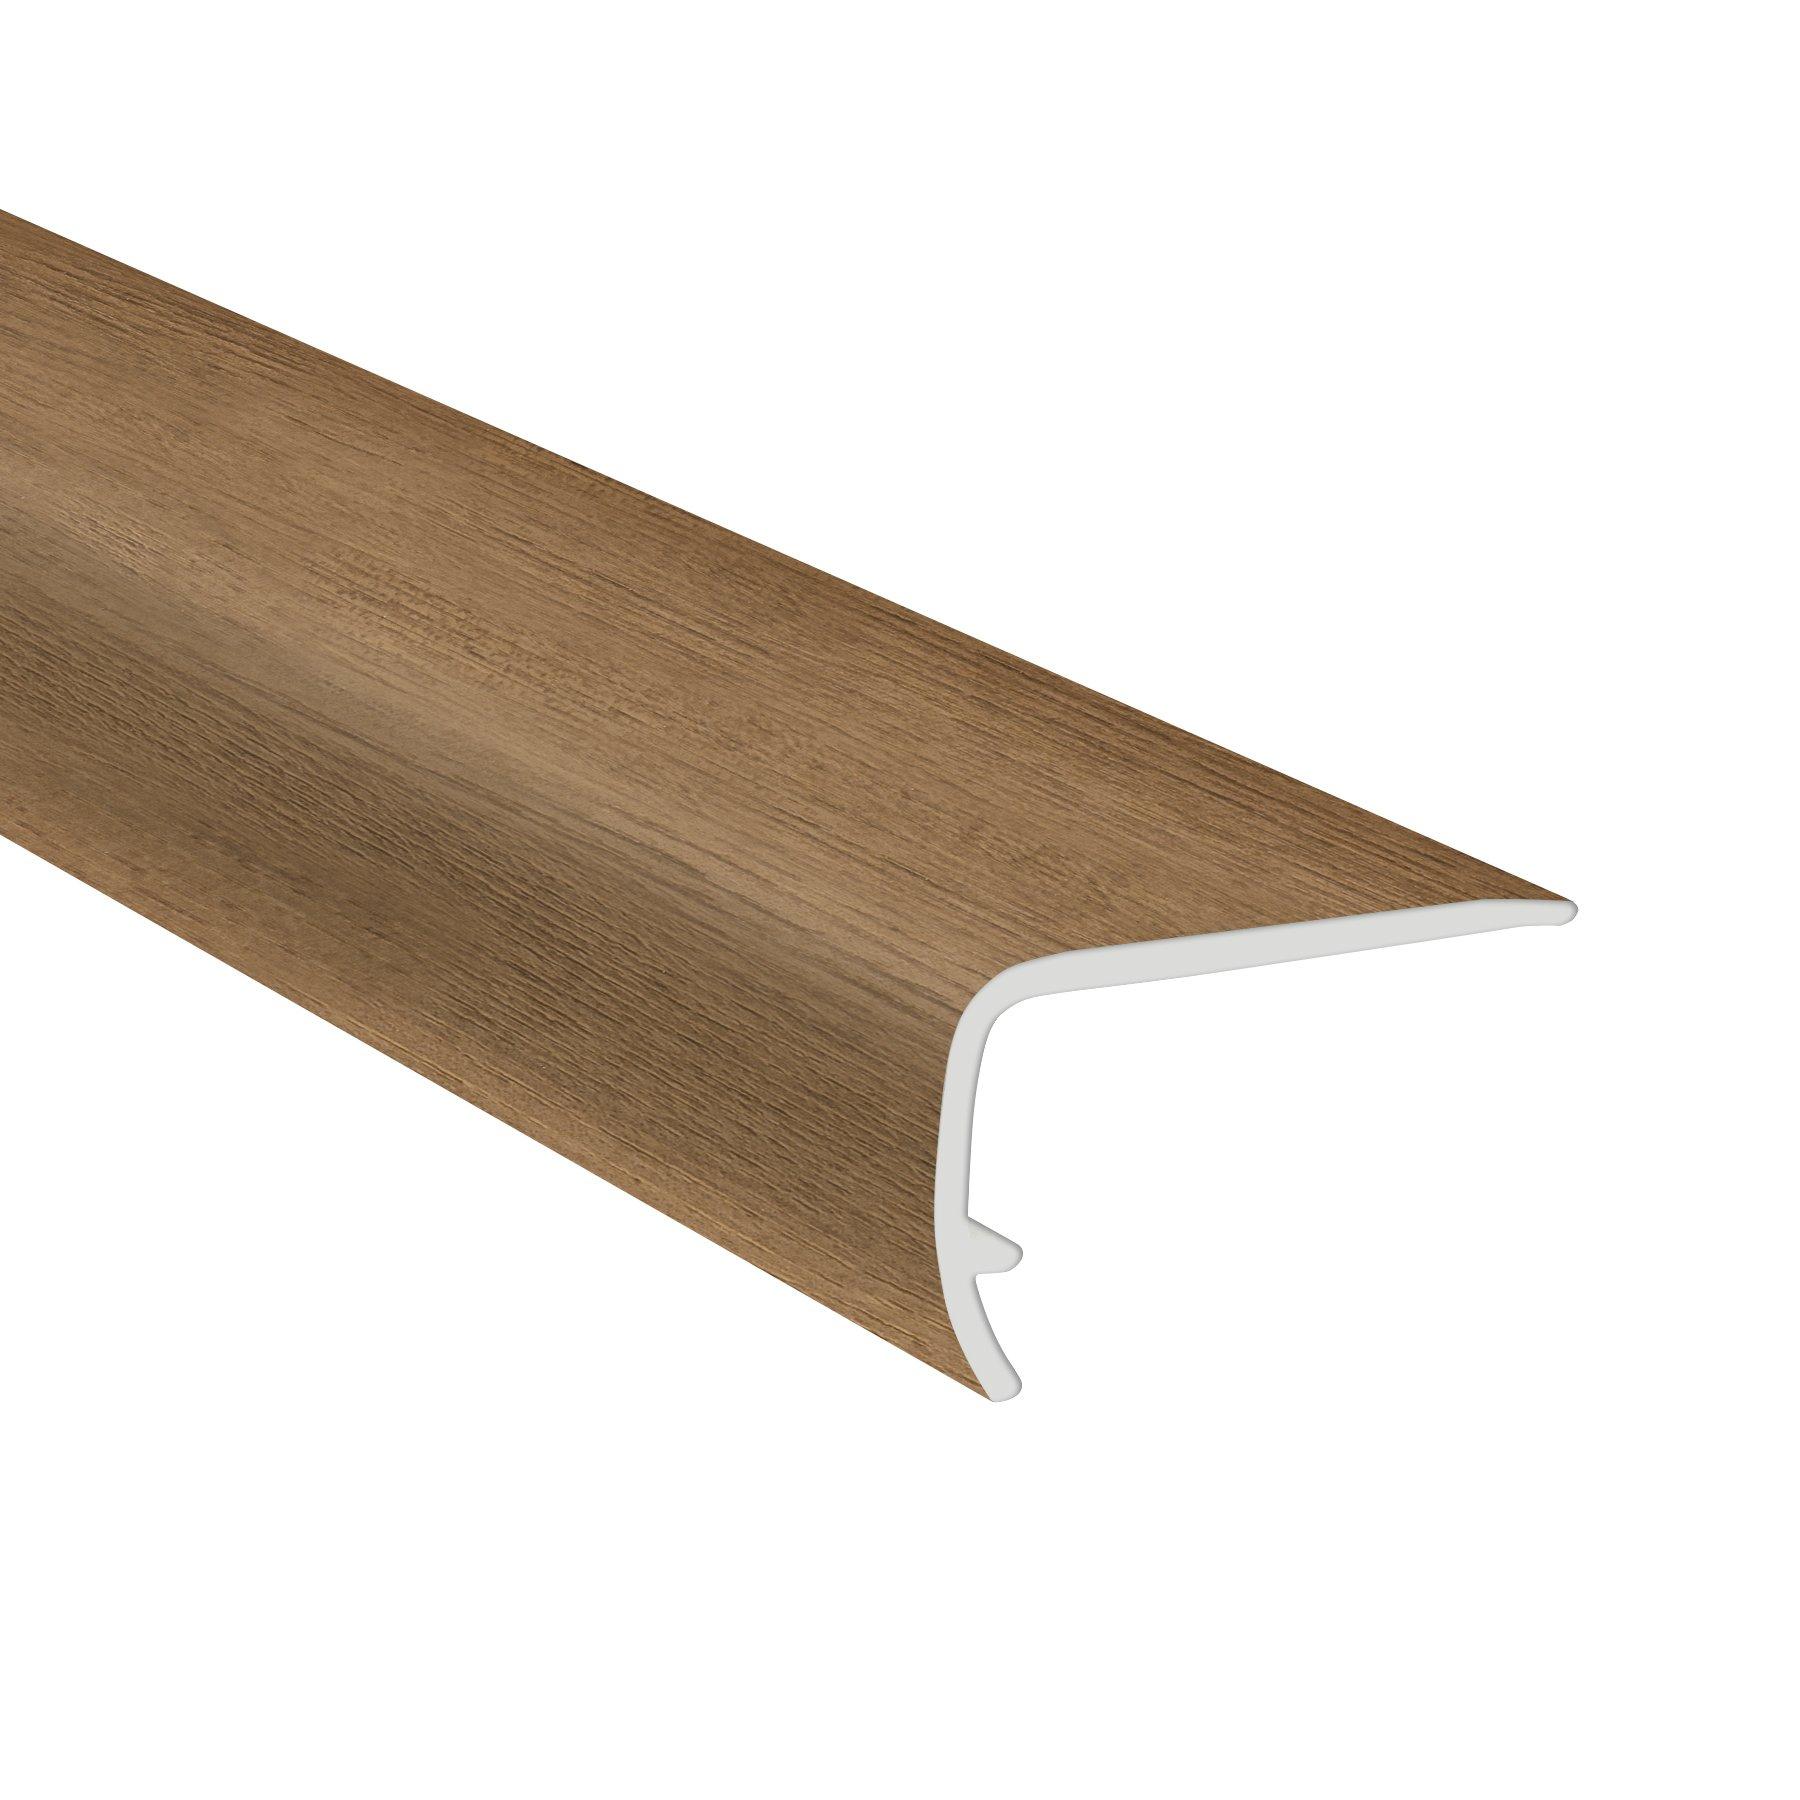 Alexandria Place 94in. Vinyl Overlapping Stair Nose